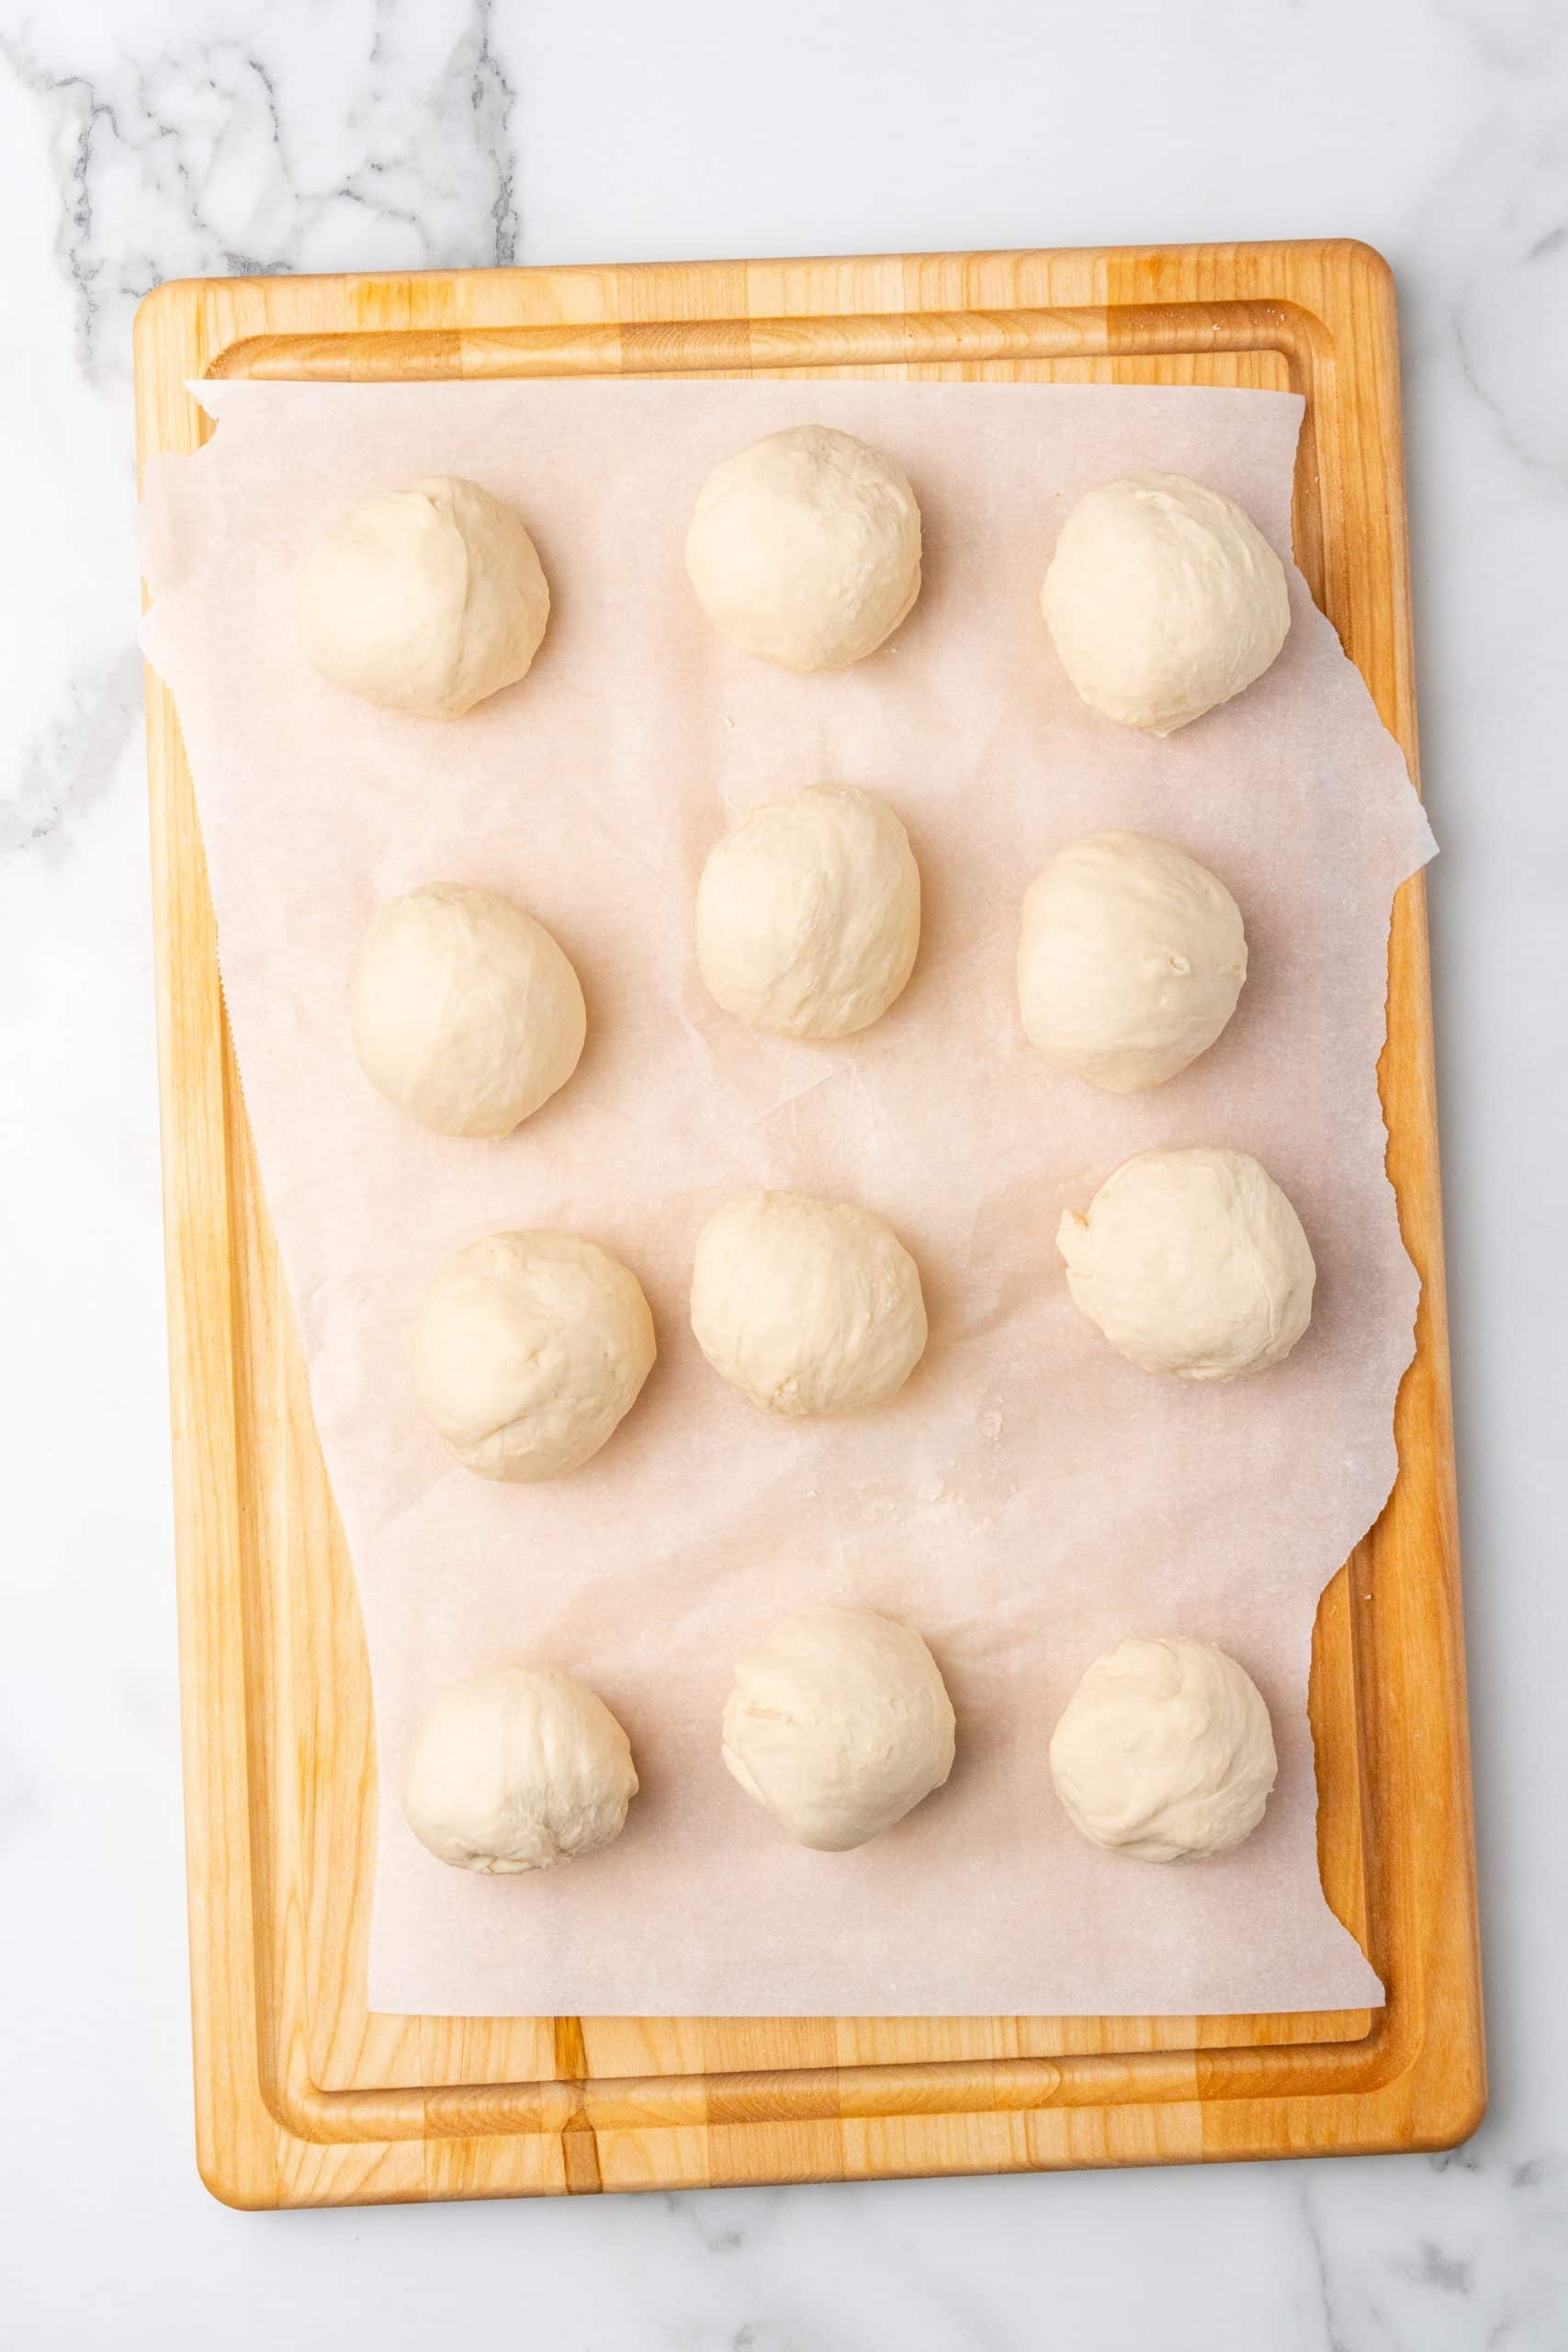 rounded balls of easy pretzel dough on a parchment paper lined cutting board